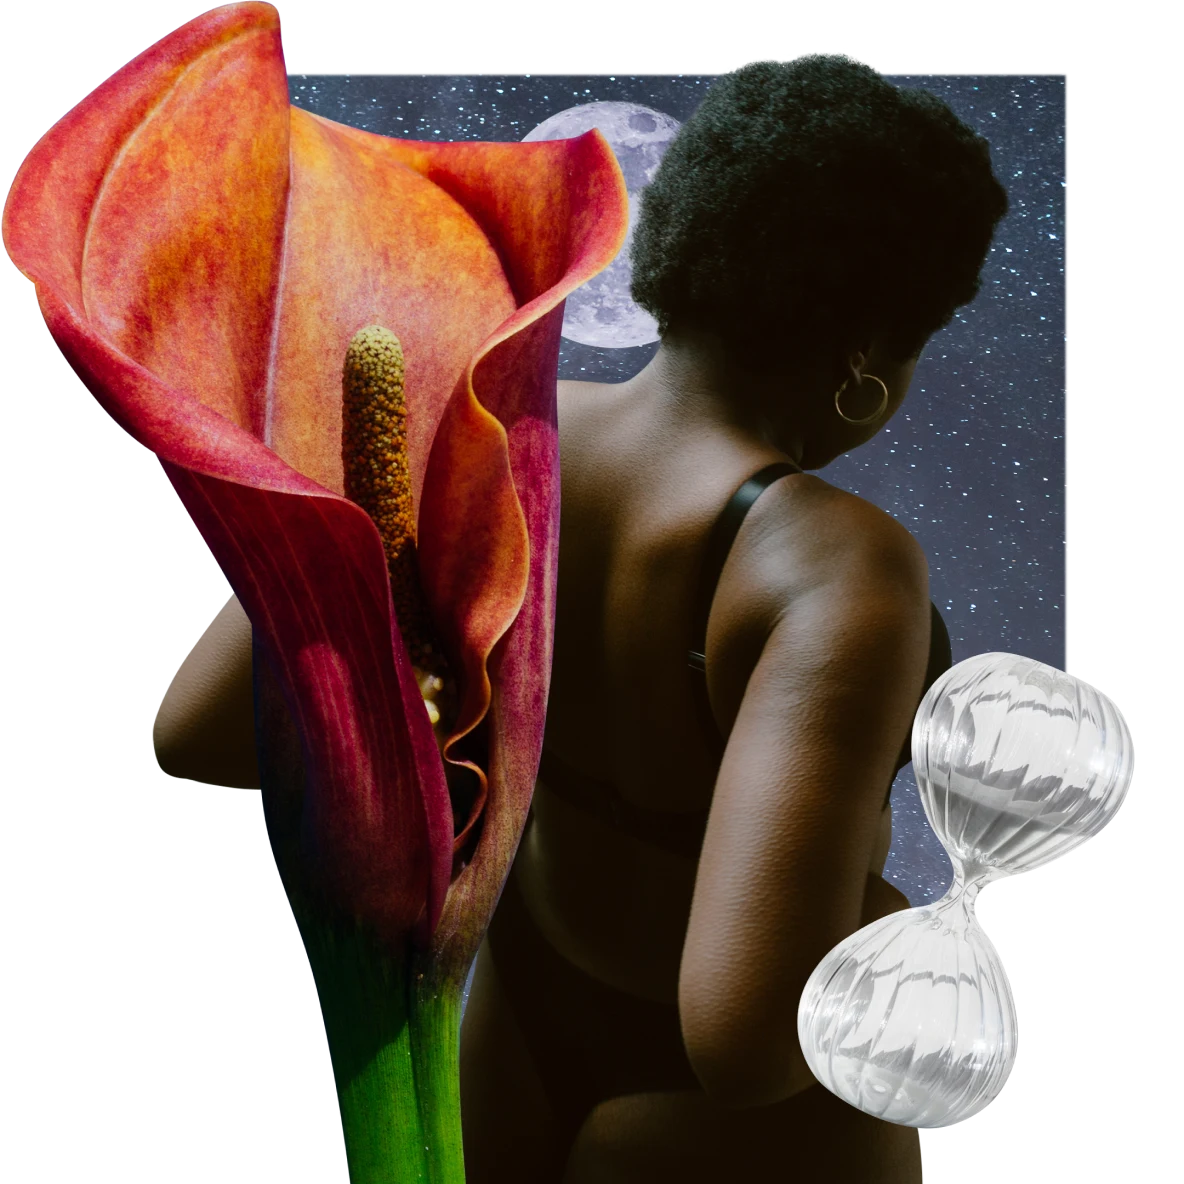 Orange calla lily at left. Black woman at right with her back turned to camera, full moon and night sky in background. Crystal hourglass at lower right.